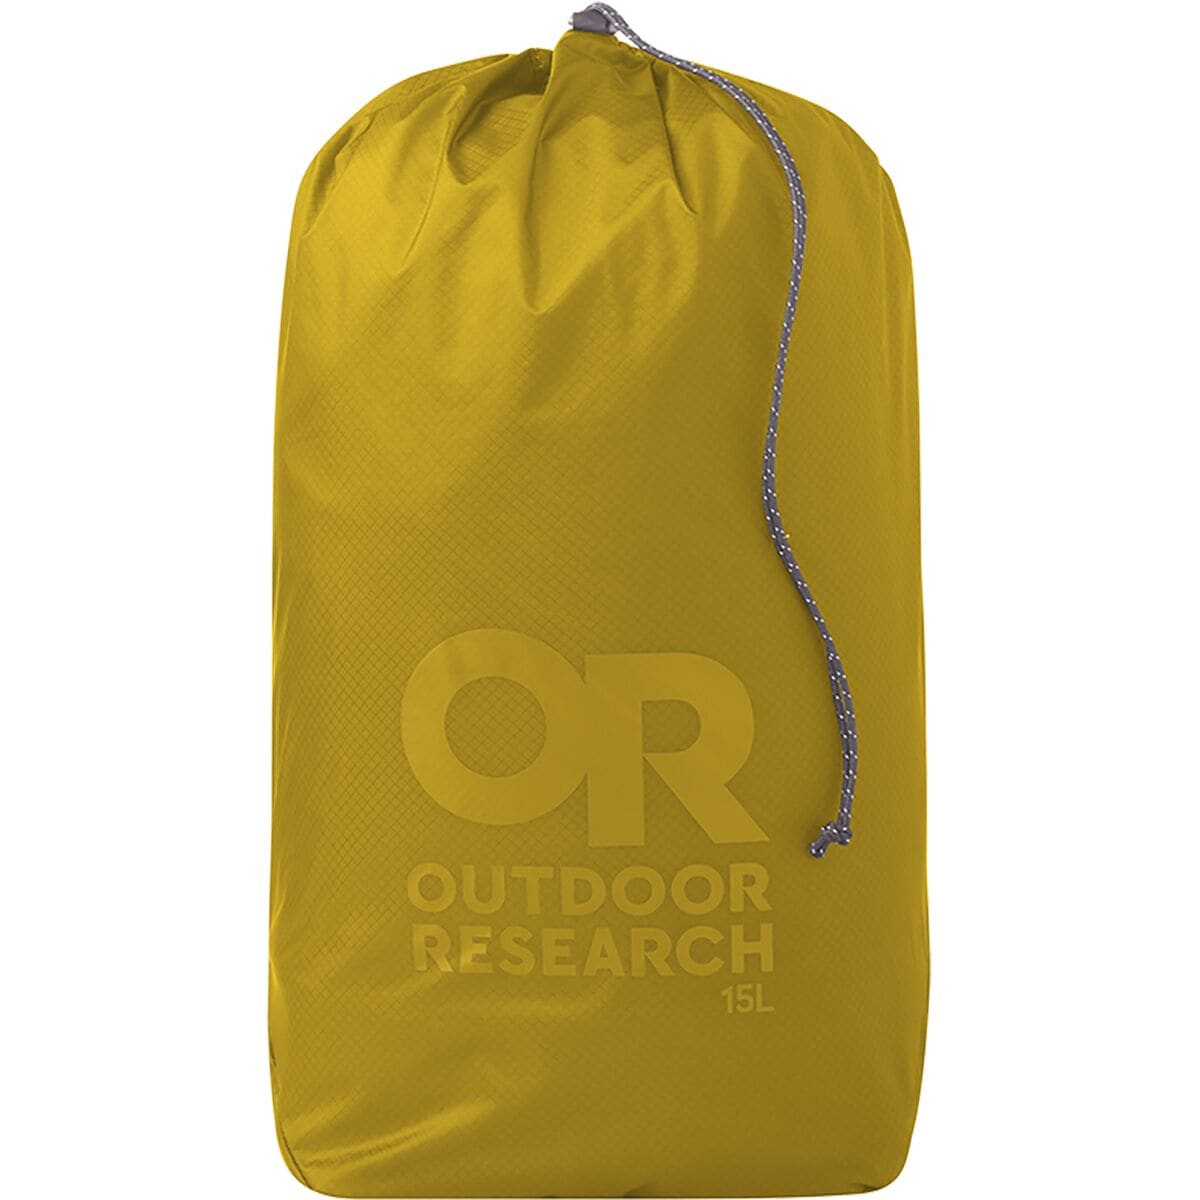 Outdoor Research PackOut Ultralight 15L Stuff Sack